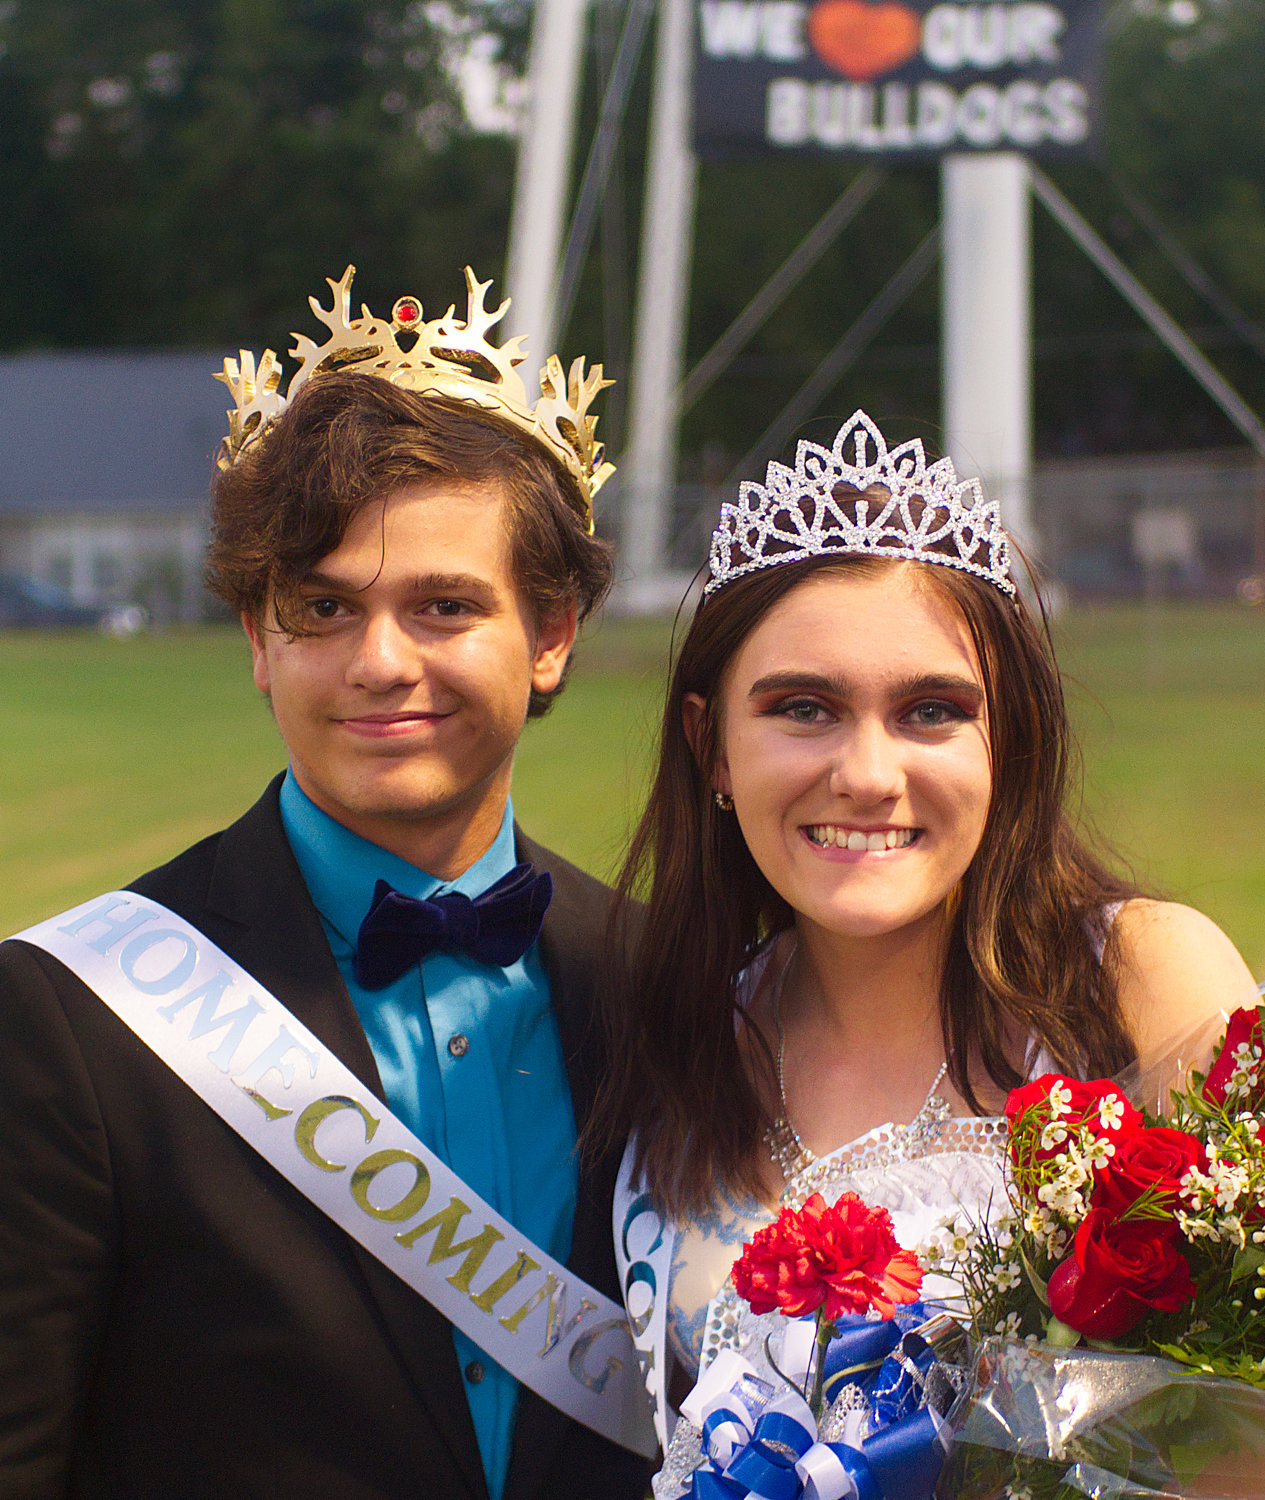 Nicholas Barnett and Whitnee Weiher were crowned homecoming king and queen Friday night in Quitman.